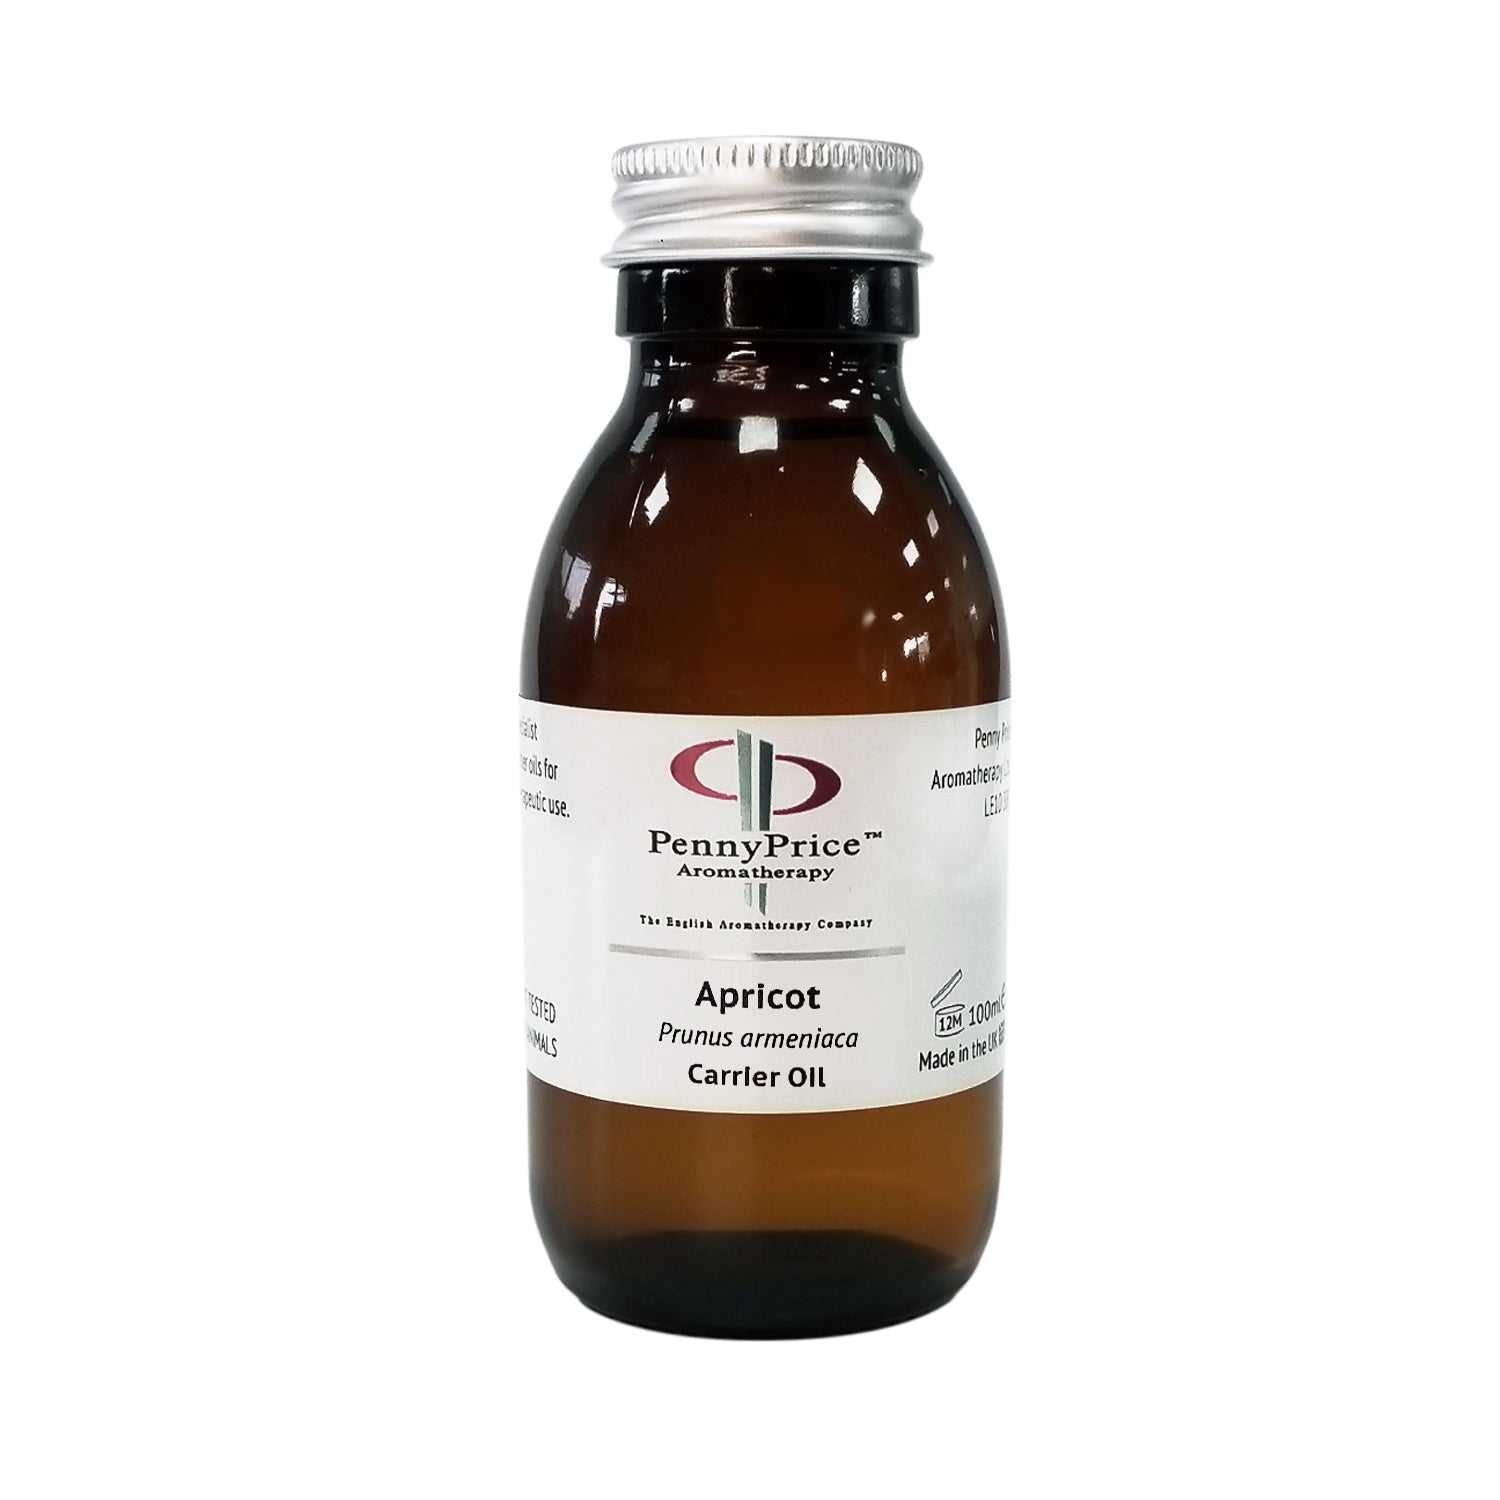 Apricot Carrier Oil